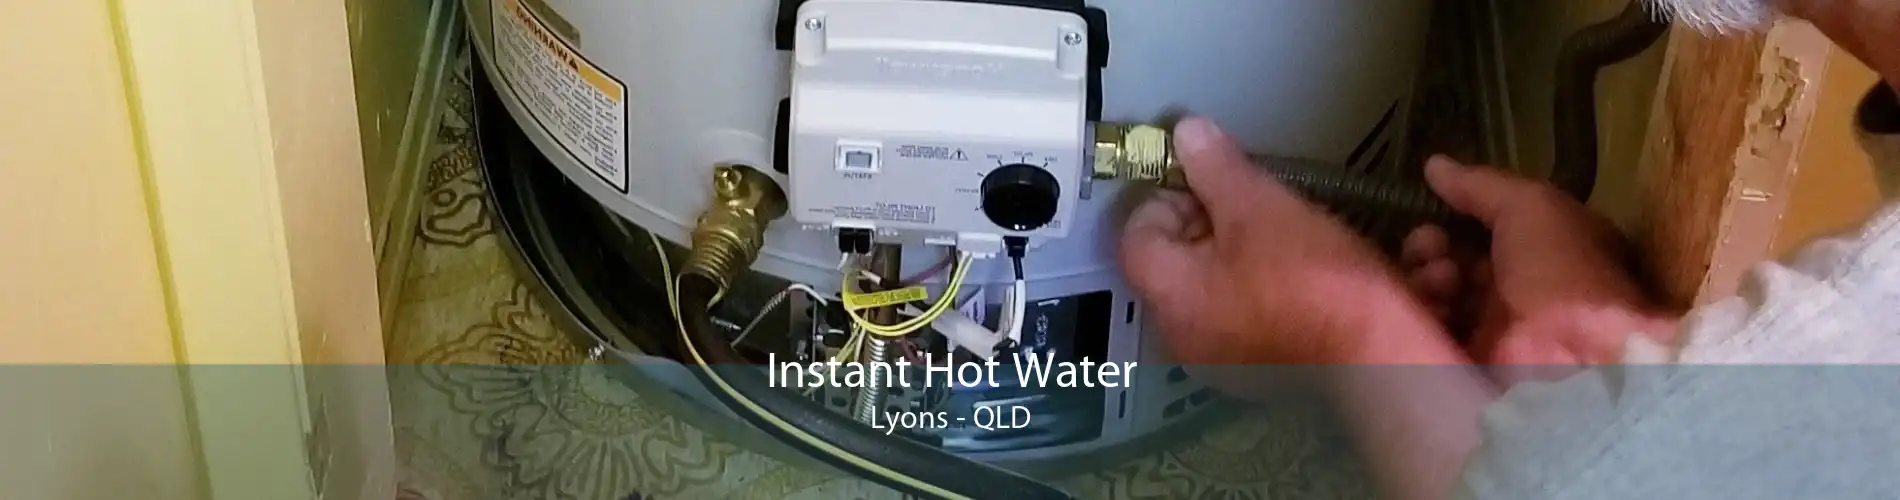 Instant Hot Water Lyons - QLD